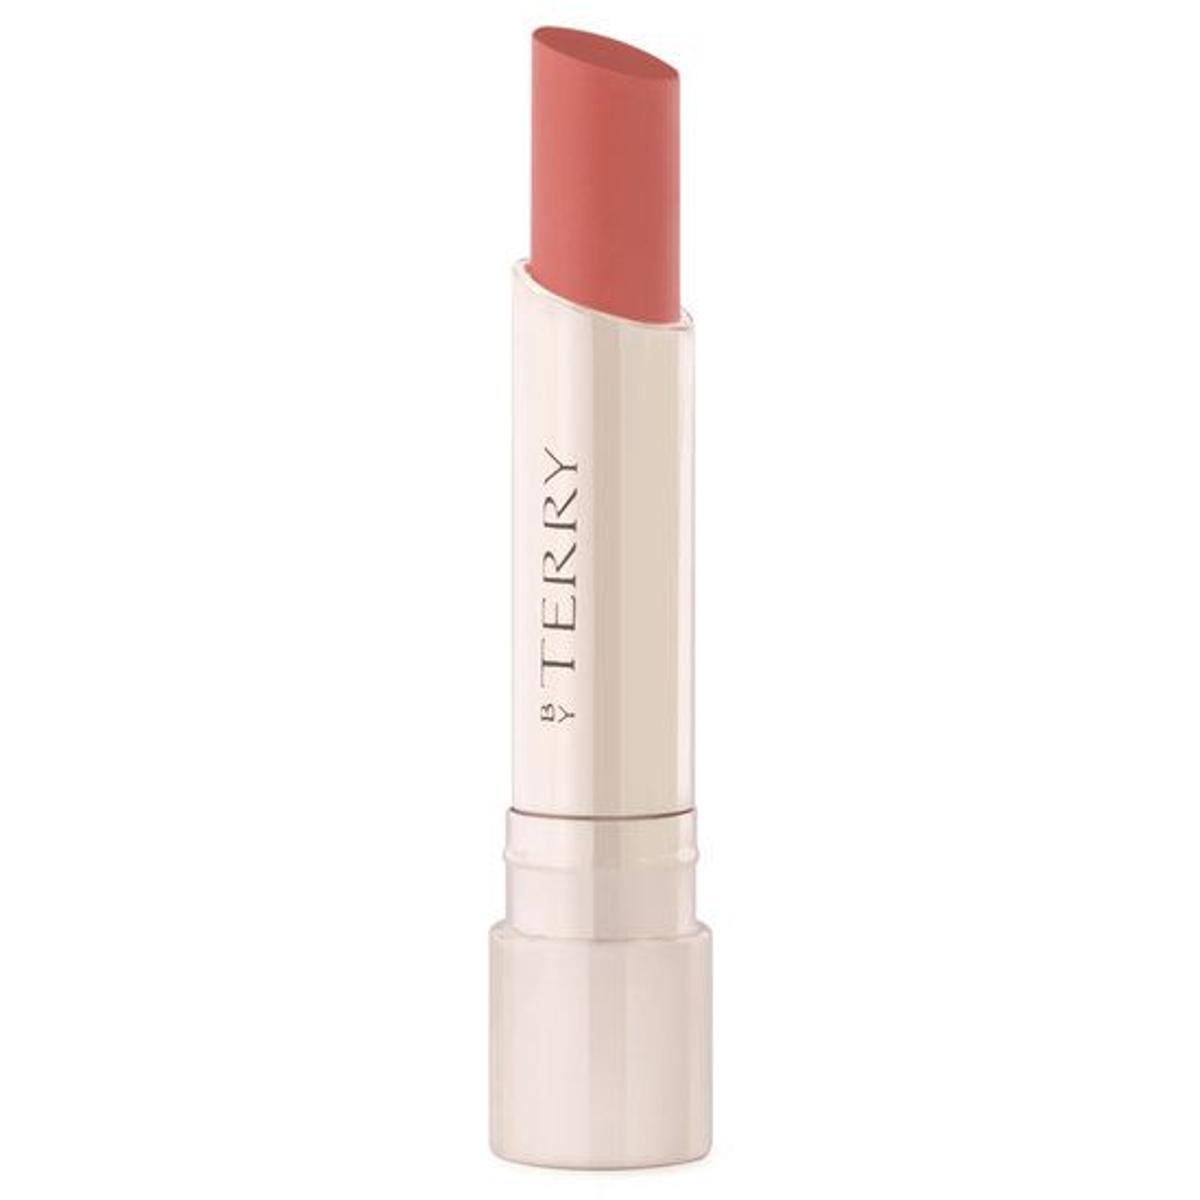 Hyaluronic Sheer Rouge, de By Terry (38,50 euros)